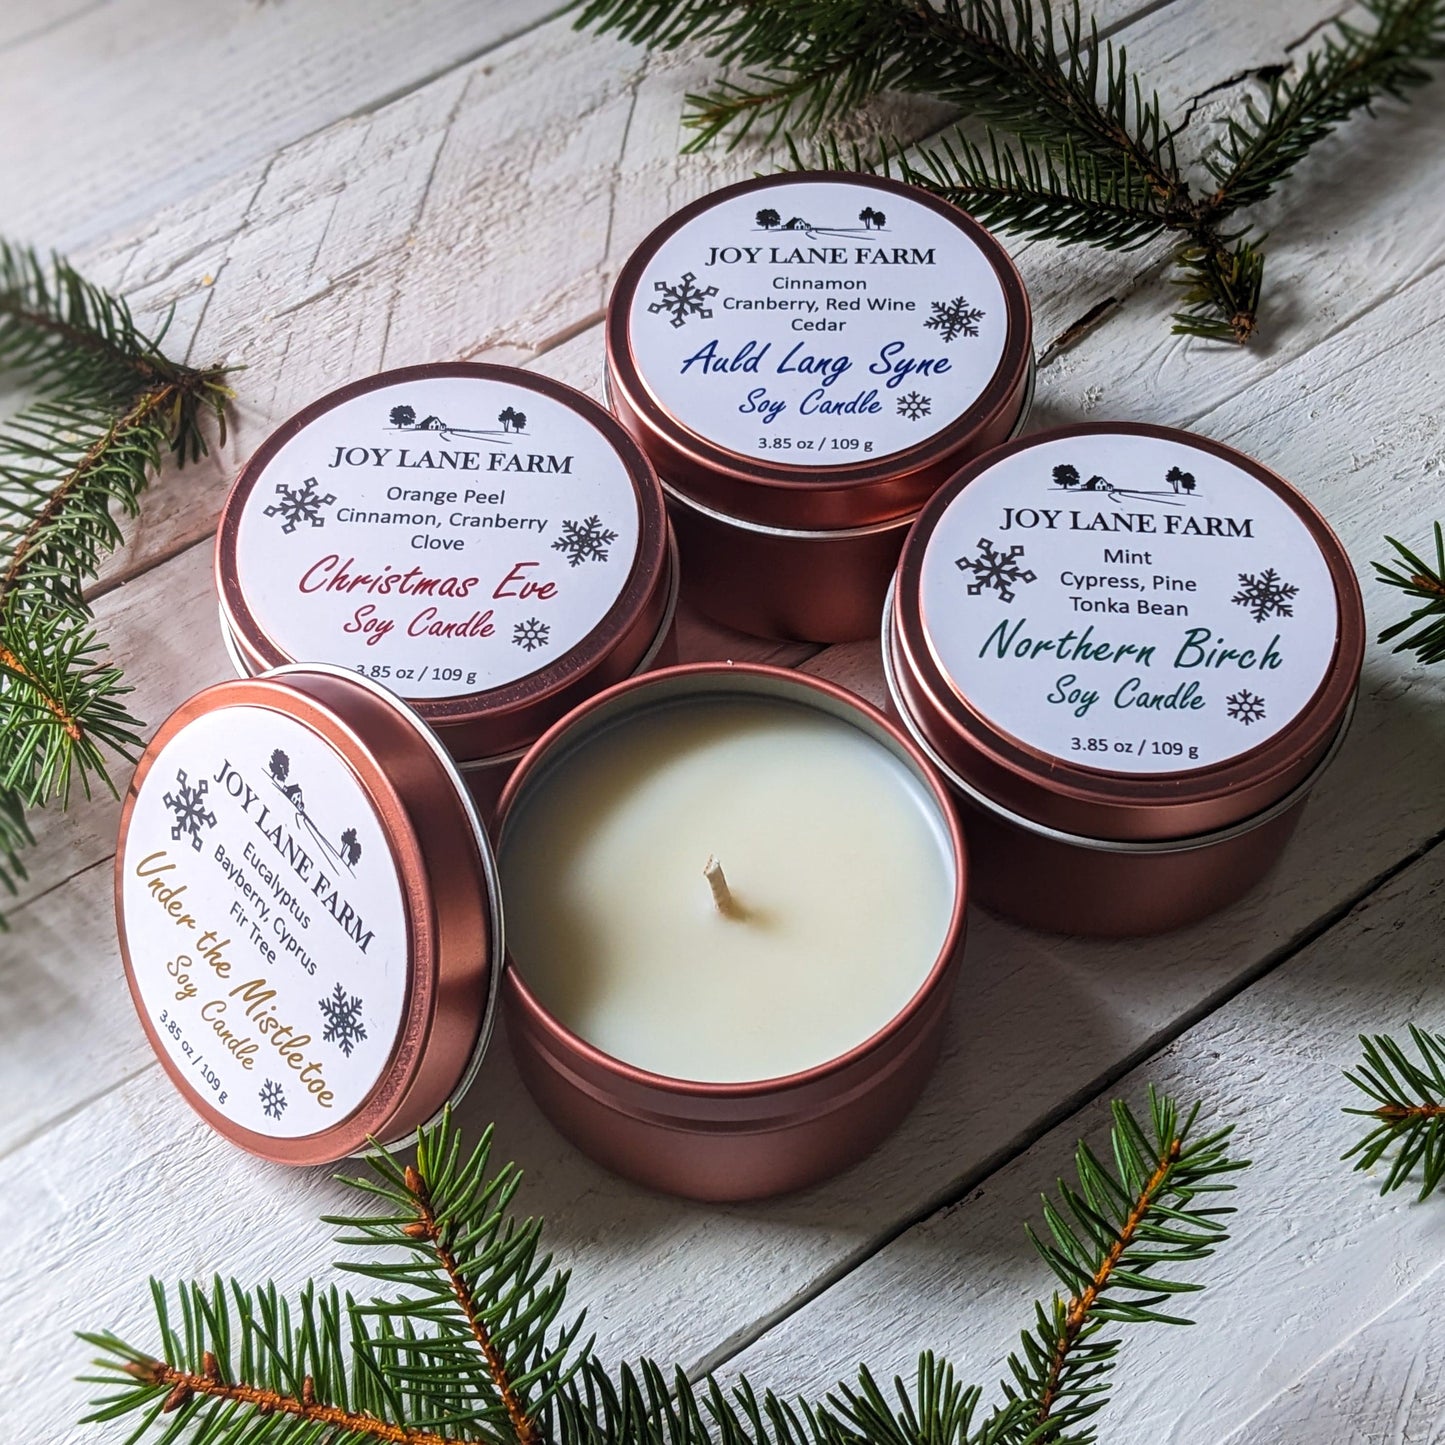 Limited Edition Holiday Candle 4-Pack!